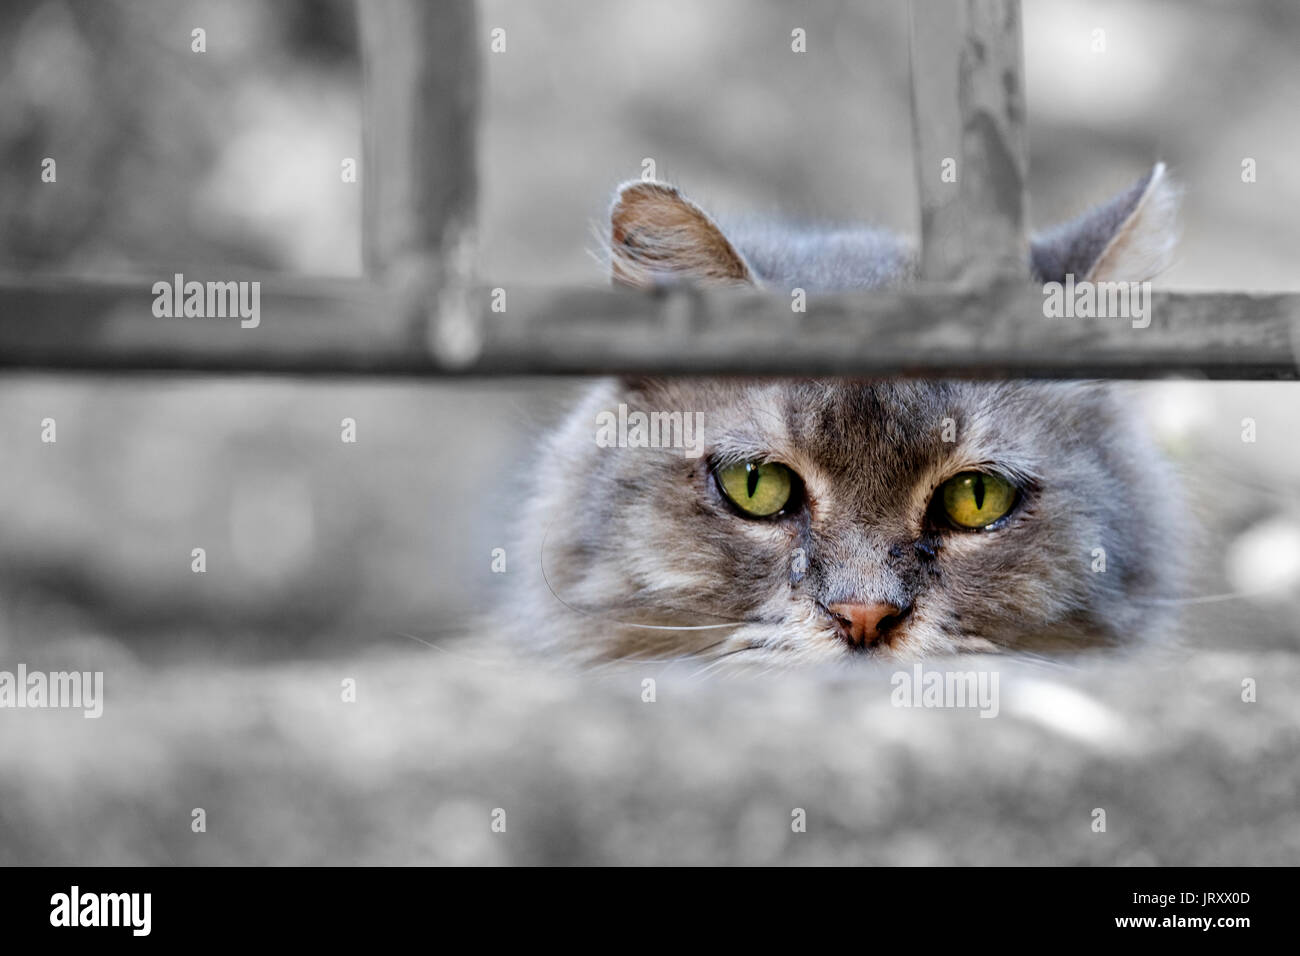 A domestic grey cat with bright green eyes staring straight into the camera through some old rusty railings Stock Photo